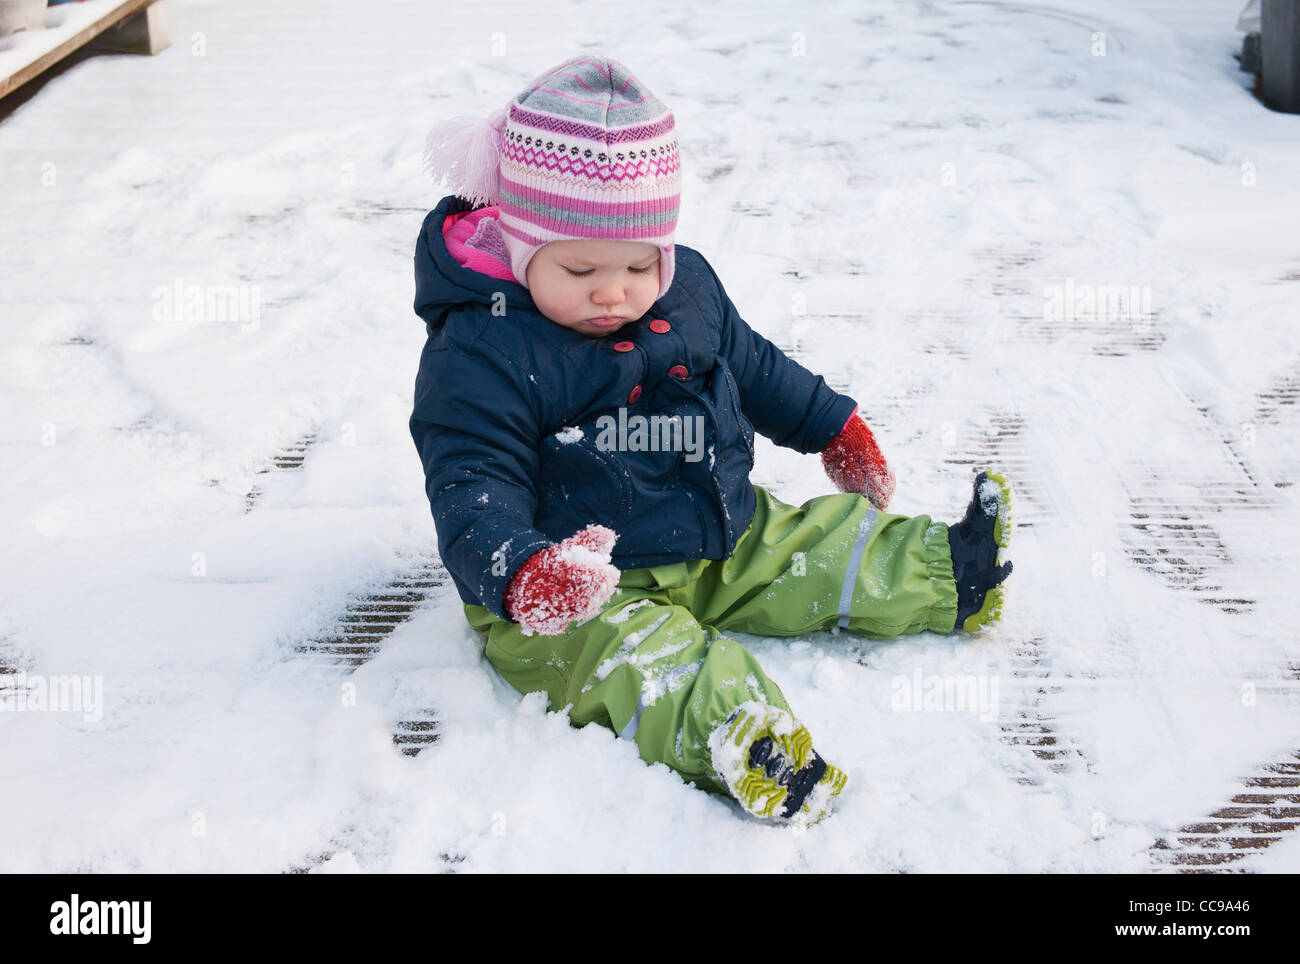 Baby Girl wearing Snow Suit sitting on Ground in Snow Stock Photo